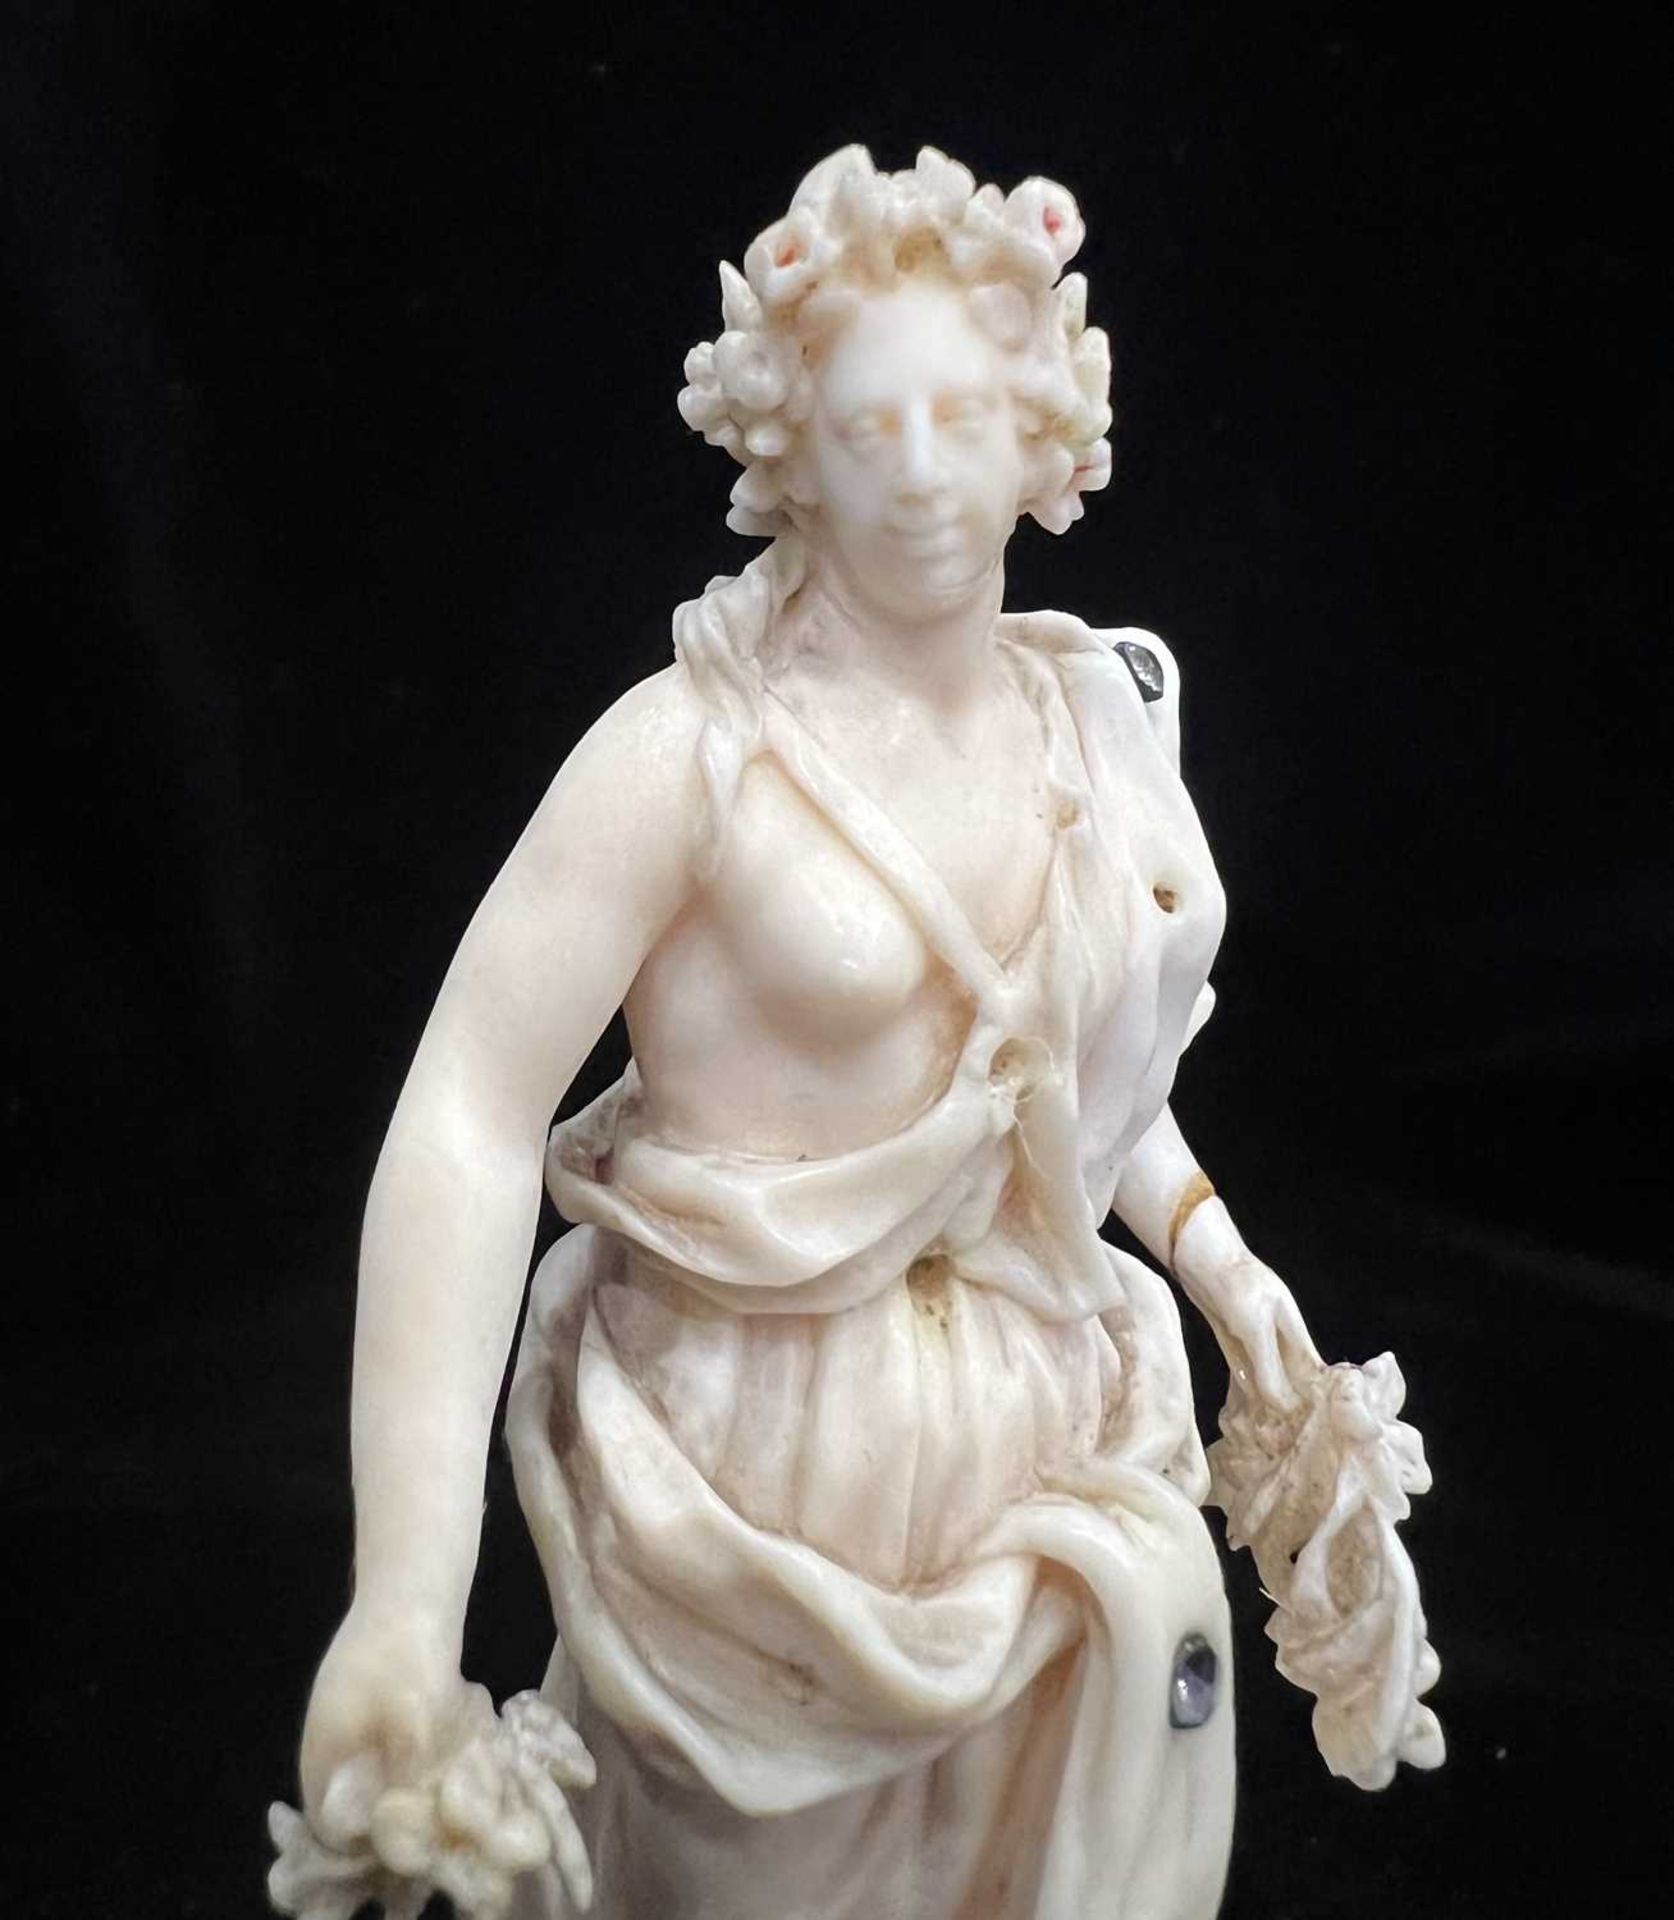 H.R.H PRINCESS MARGARET'S WEDDING GIFT: A PAIR OF 18TH CENTURY IVORY FIGURES OF SPRING AND AUTUMN - Image 4 of 14